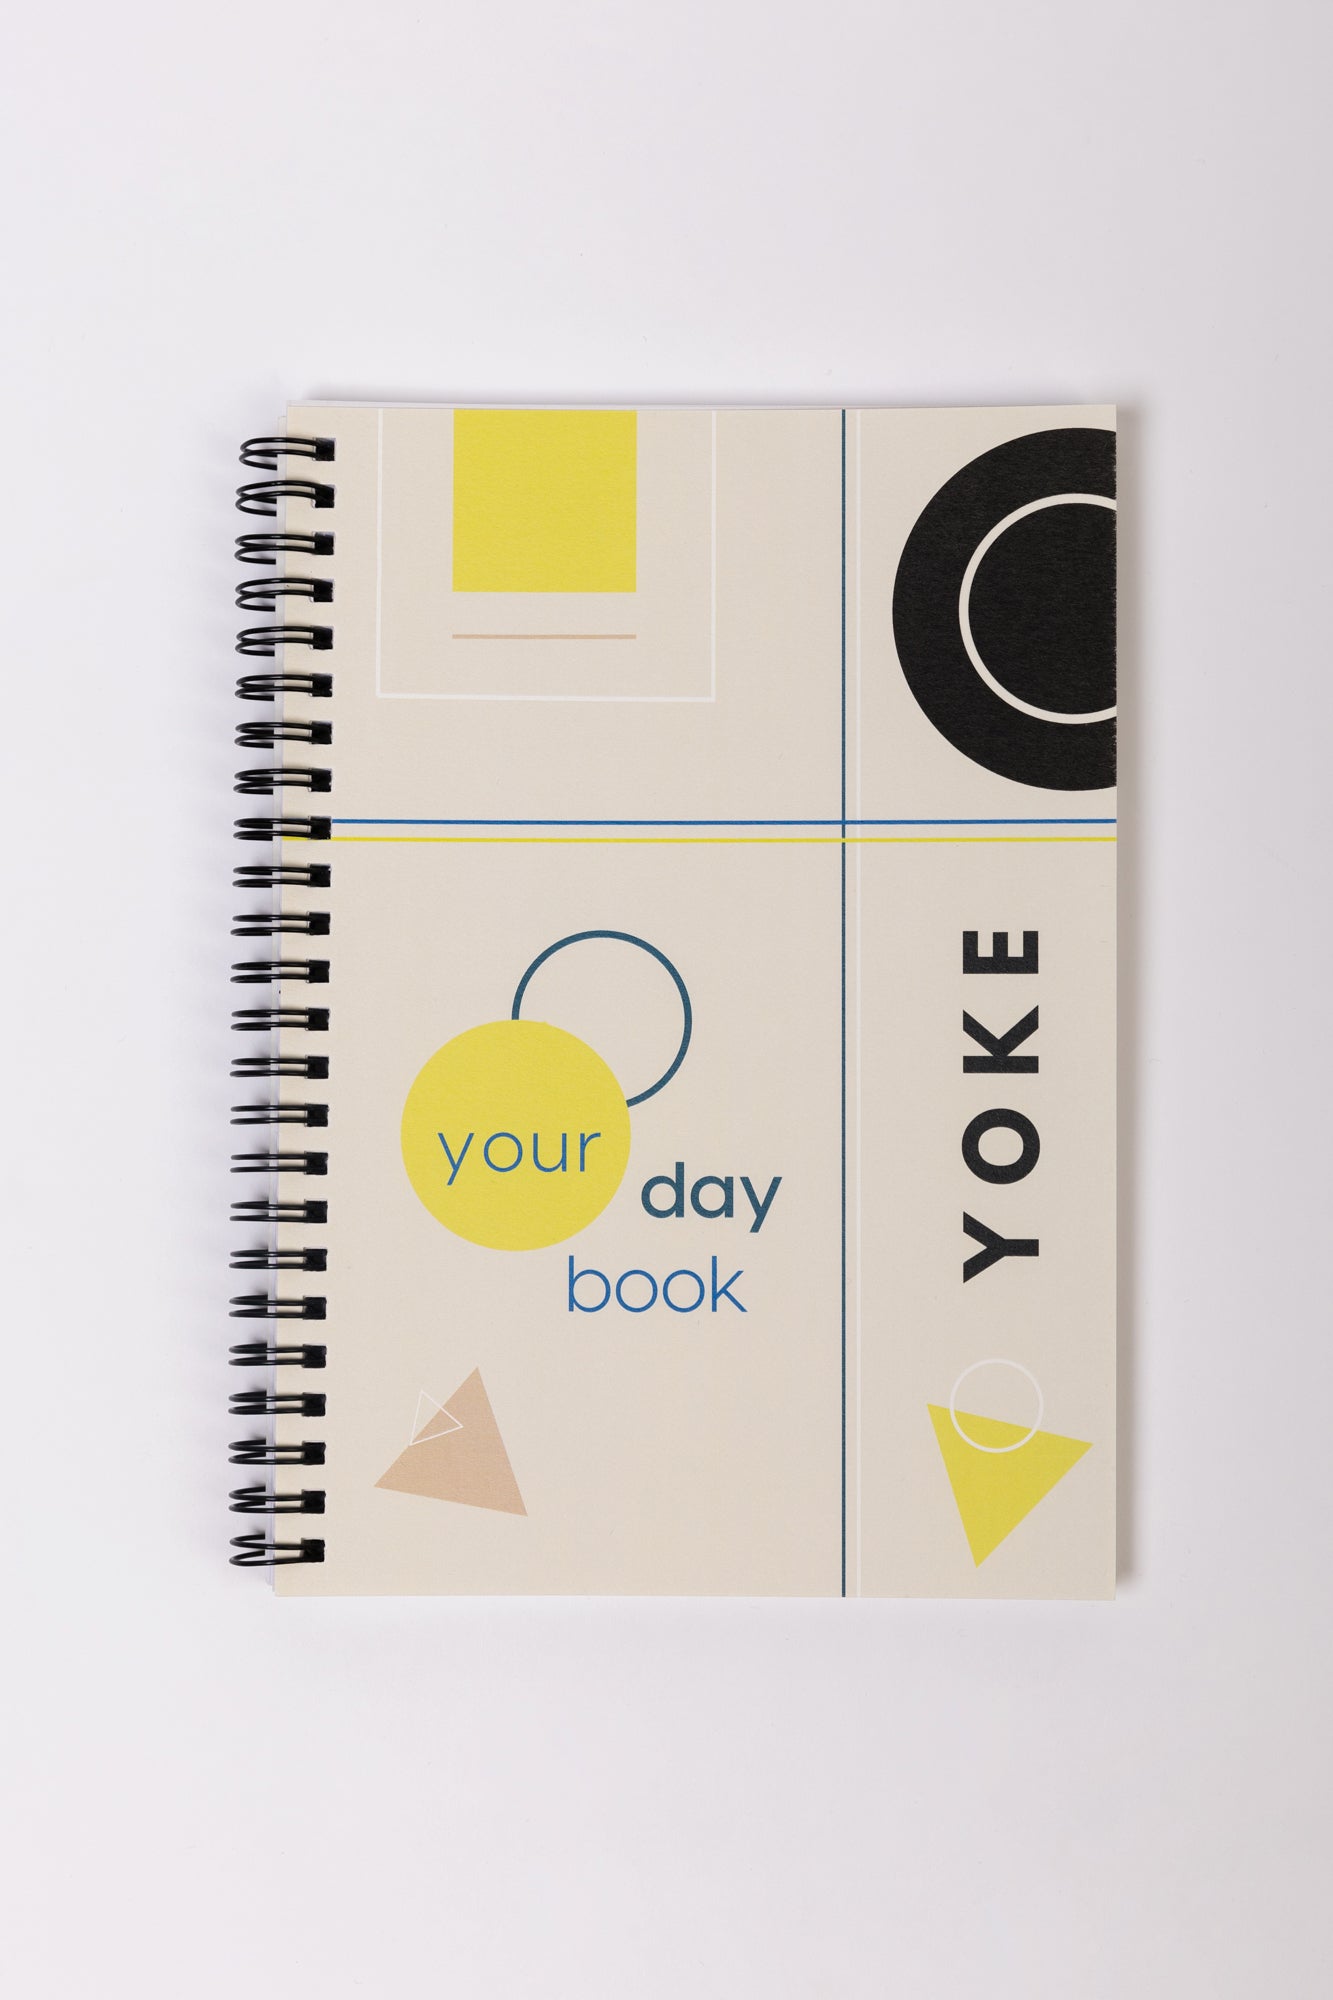 Day Book